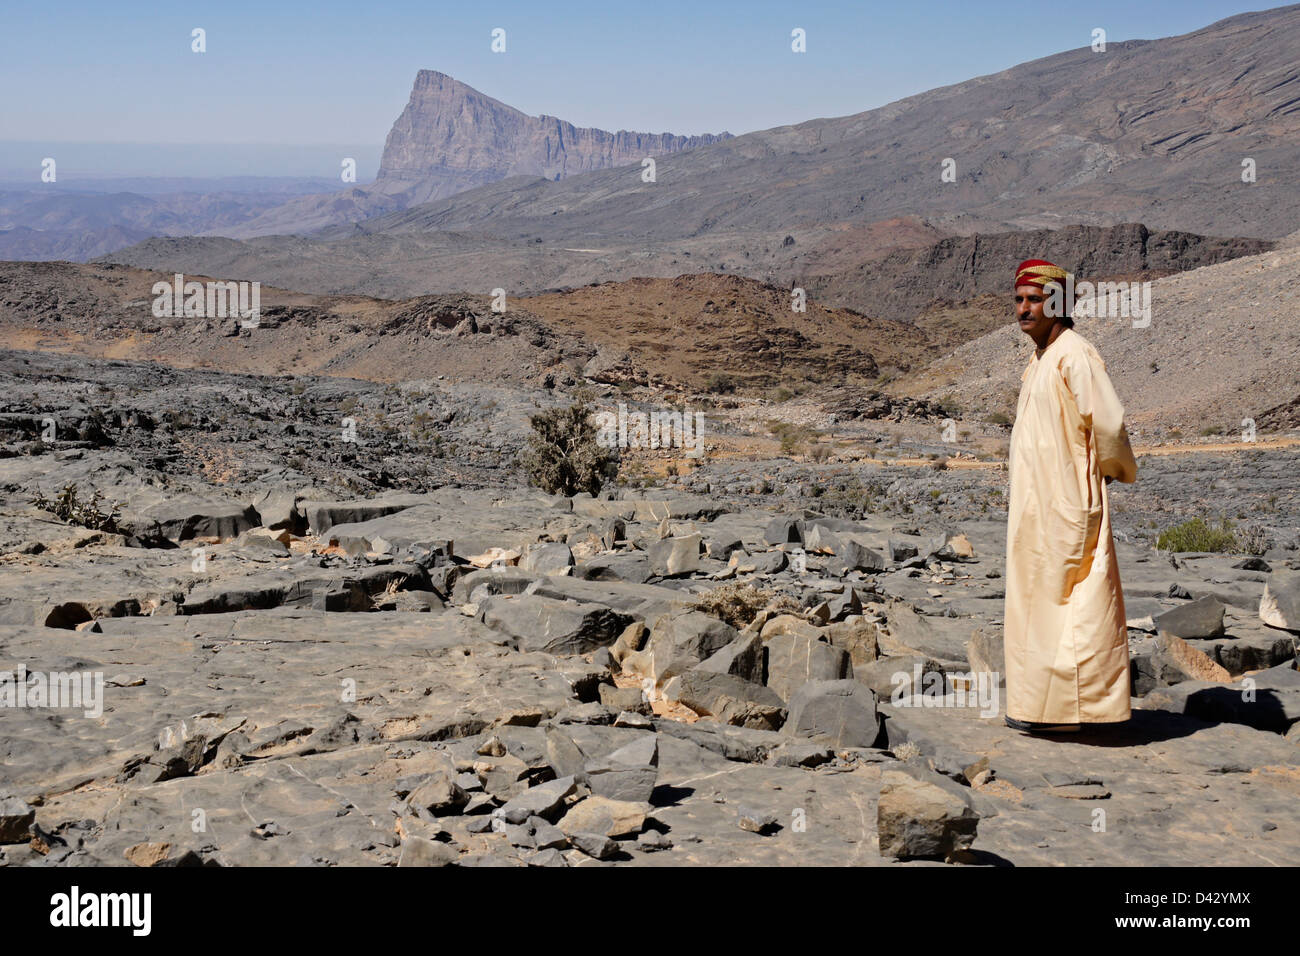 Omani man with Jebel Misht in background, Oman Stock Photo